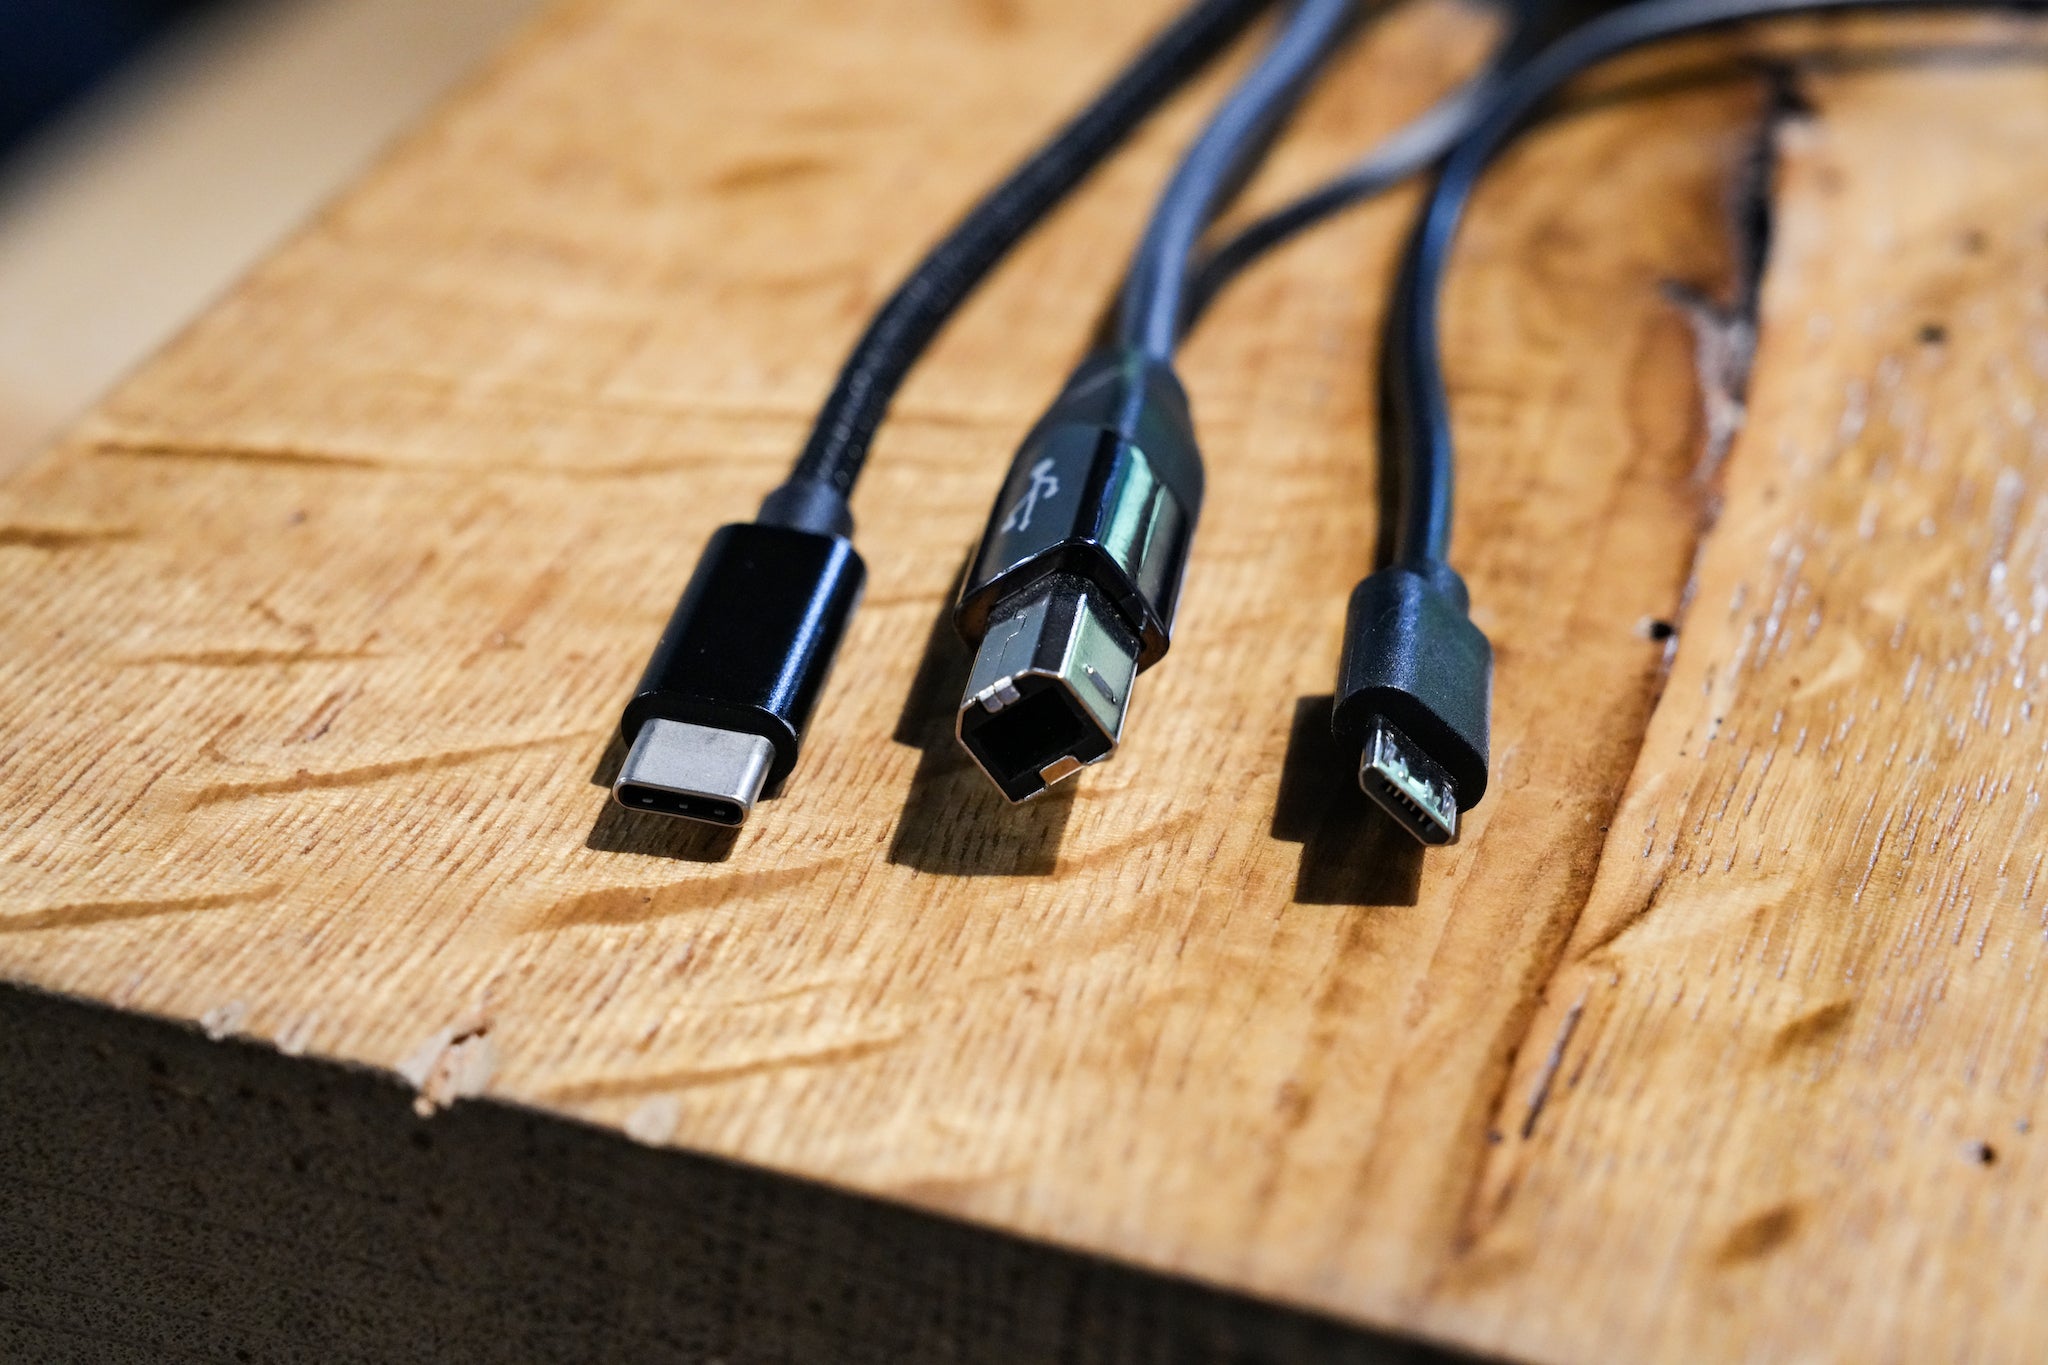 The importance of separating Band I and II cables